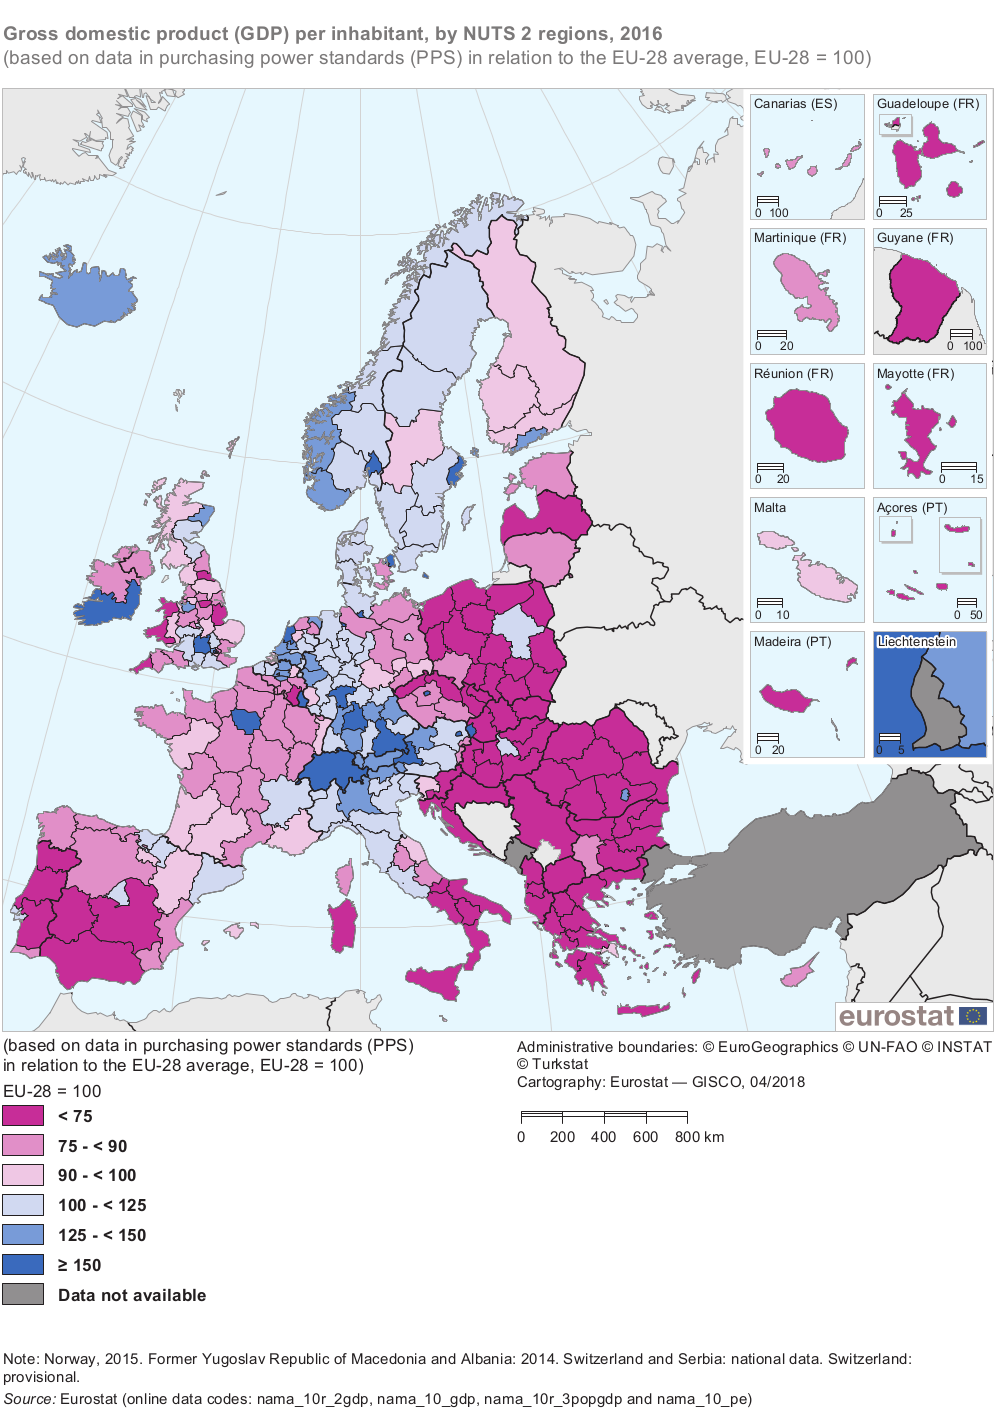 Gross_domestic_product_%28GDP%29_per_inhabitant%2C_by_NUTS_2_regions%2C_2016_%28based_on_data_in_purchasing_power_standards_%28PPS%29_in_relation_to_the_EU-28_average%2C_EU-28_%3D_100%29-RYB18.png